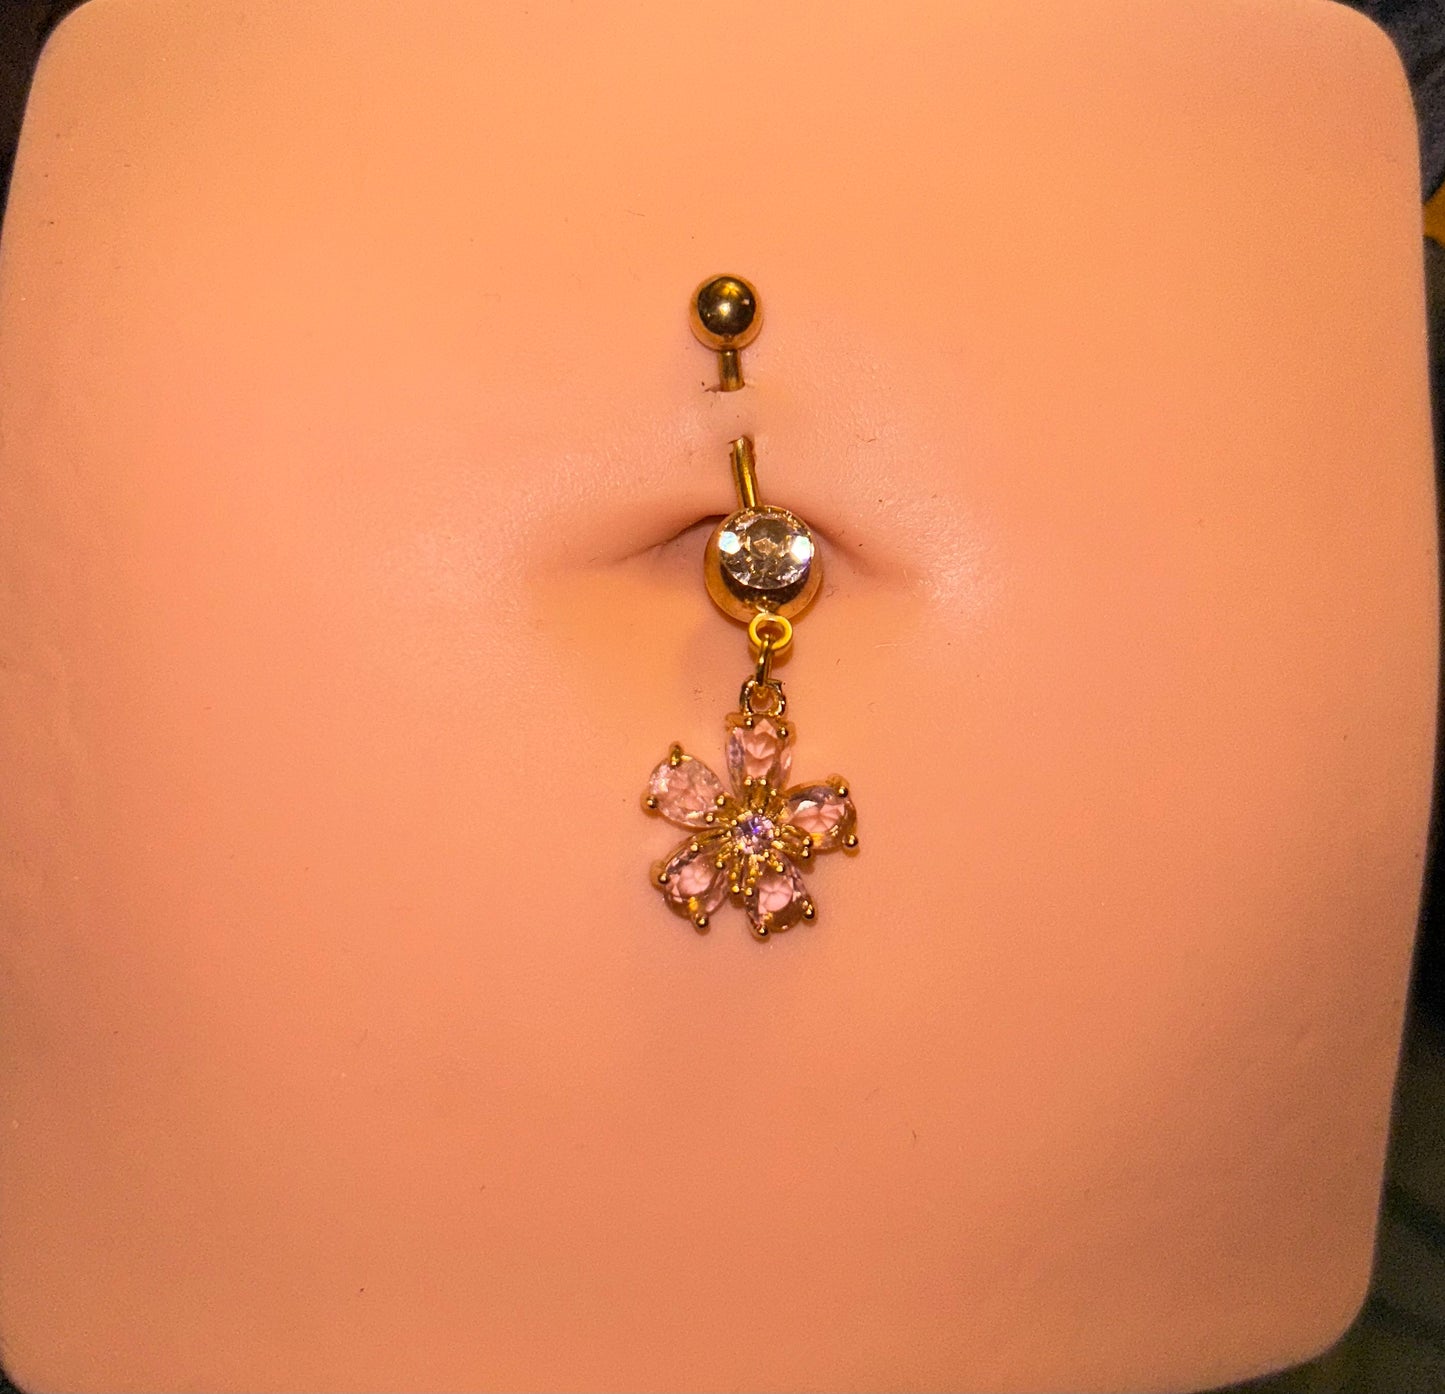 Flora belly ring